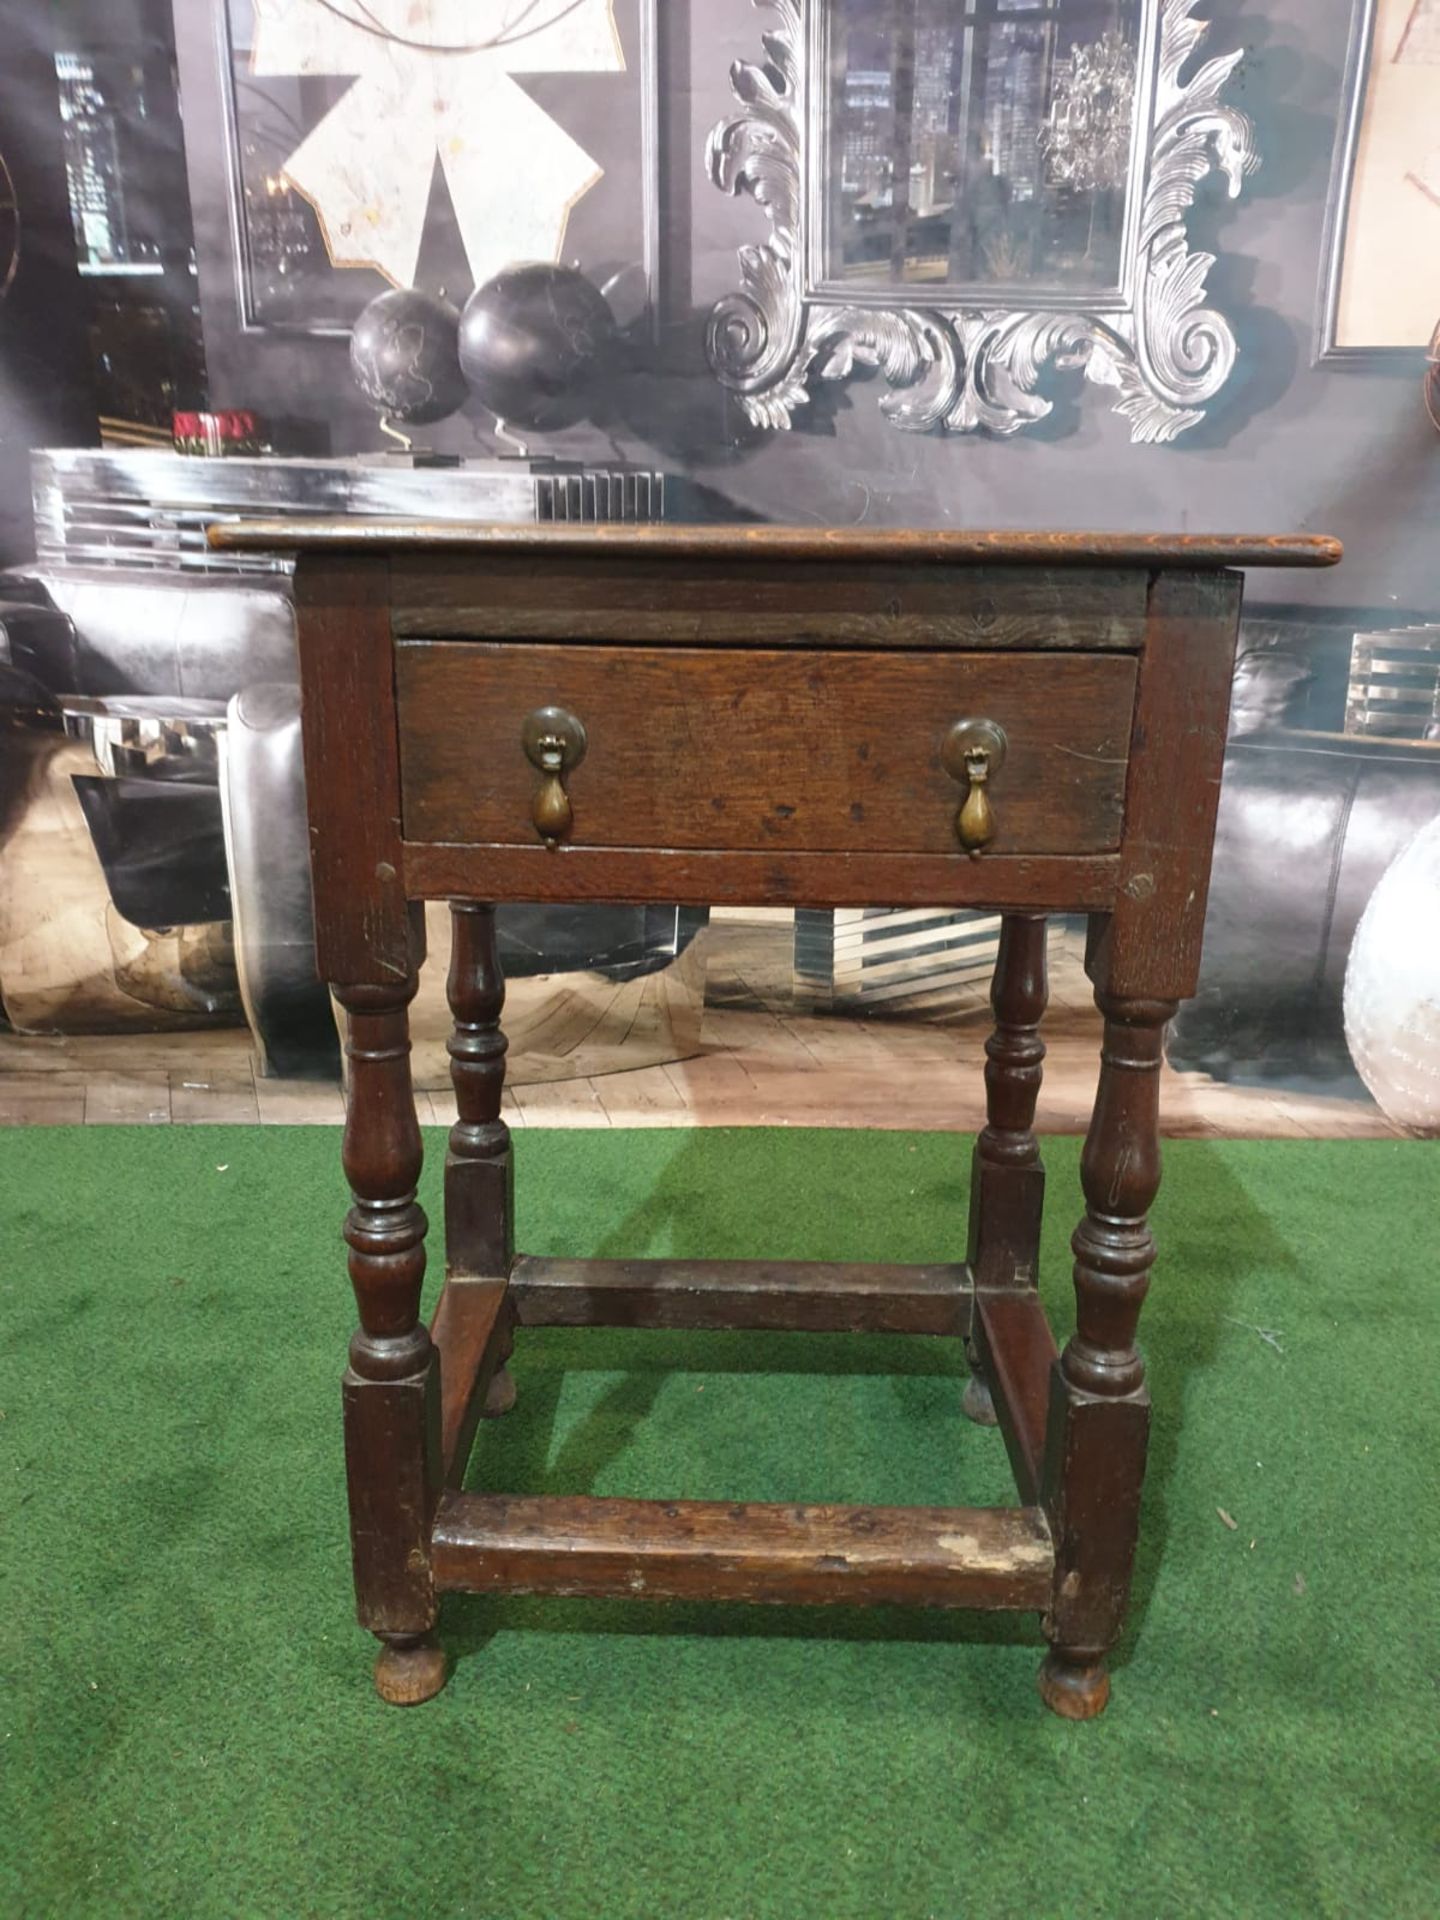 Oak C19th Century, English Carved Side Table with drawer with a plain simple top with a bevelled - Image 3 of 6